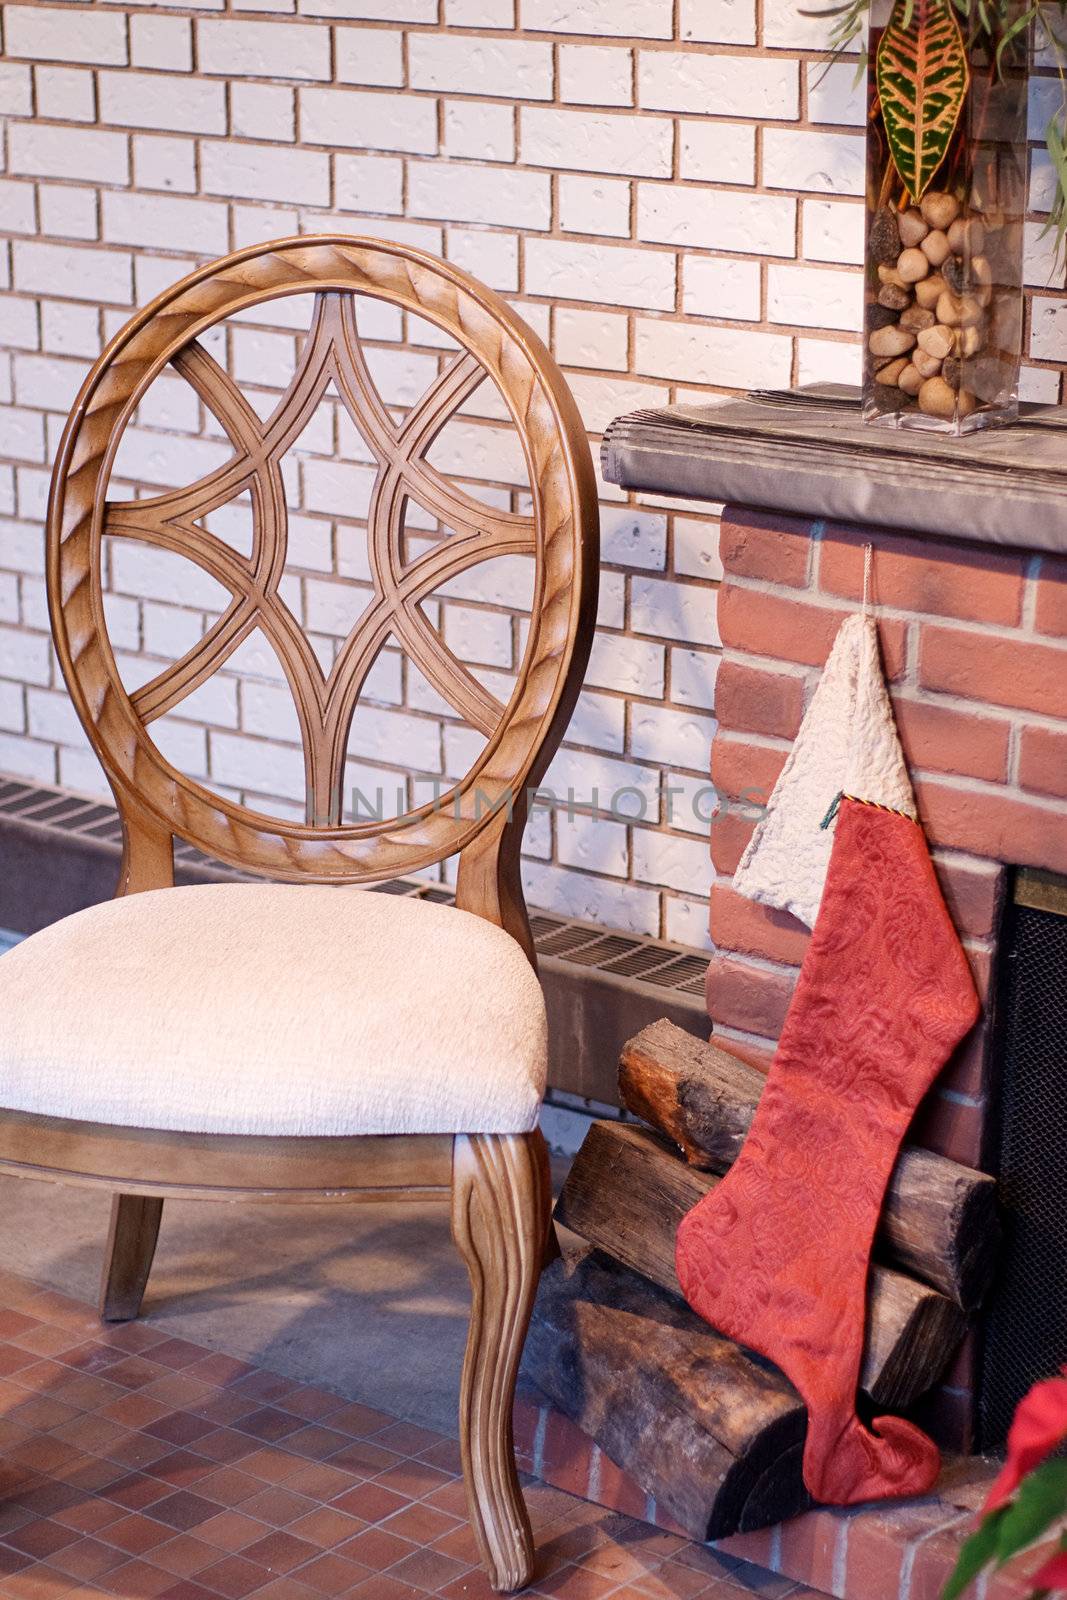 A Christmas stocking hung by the fireplace with a wooden chair beside it